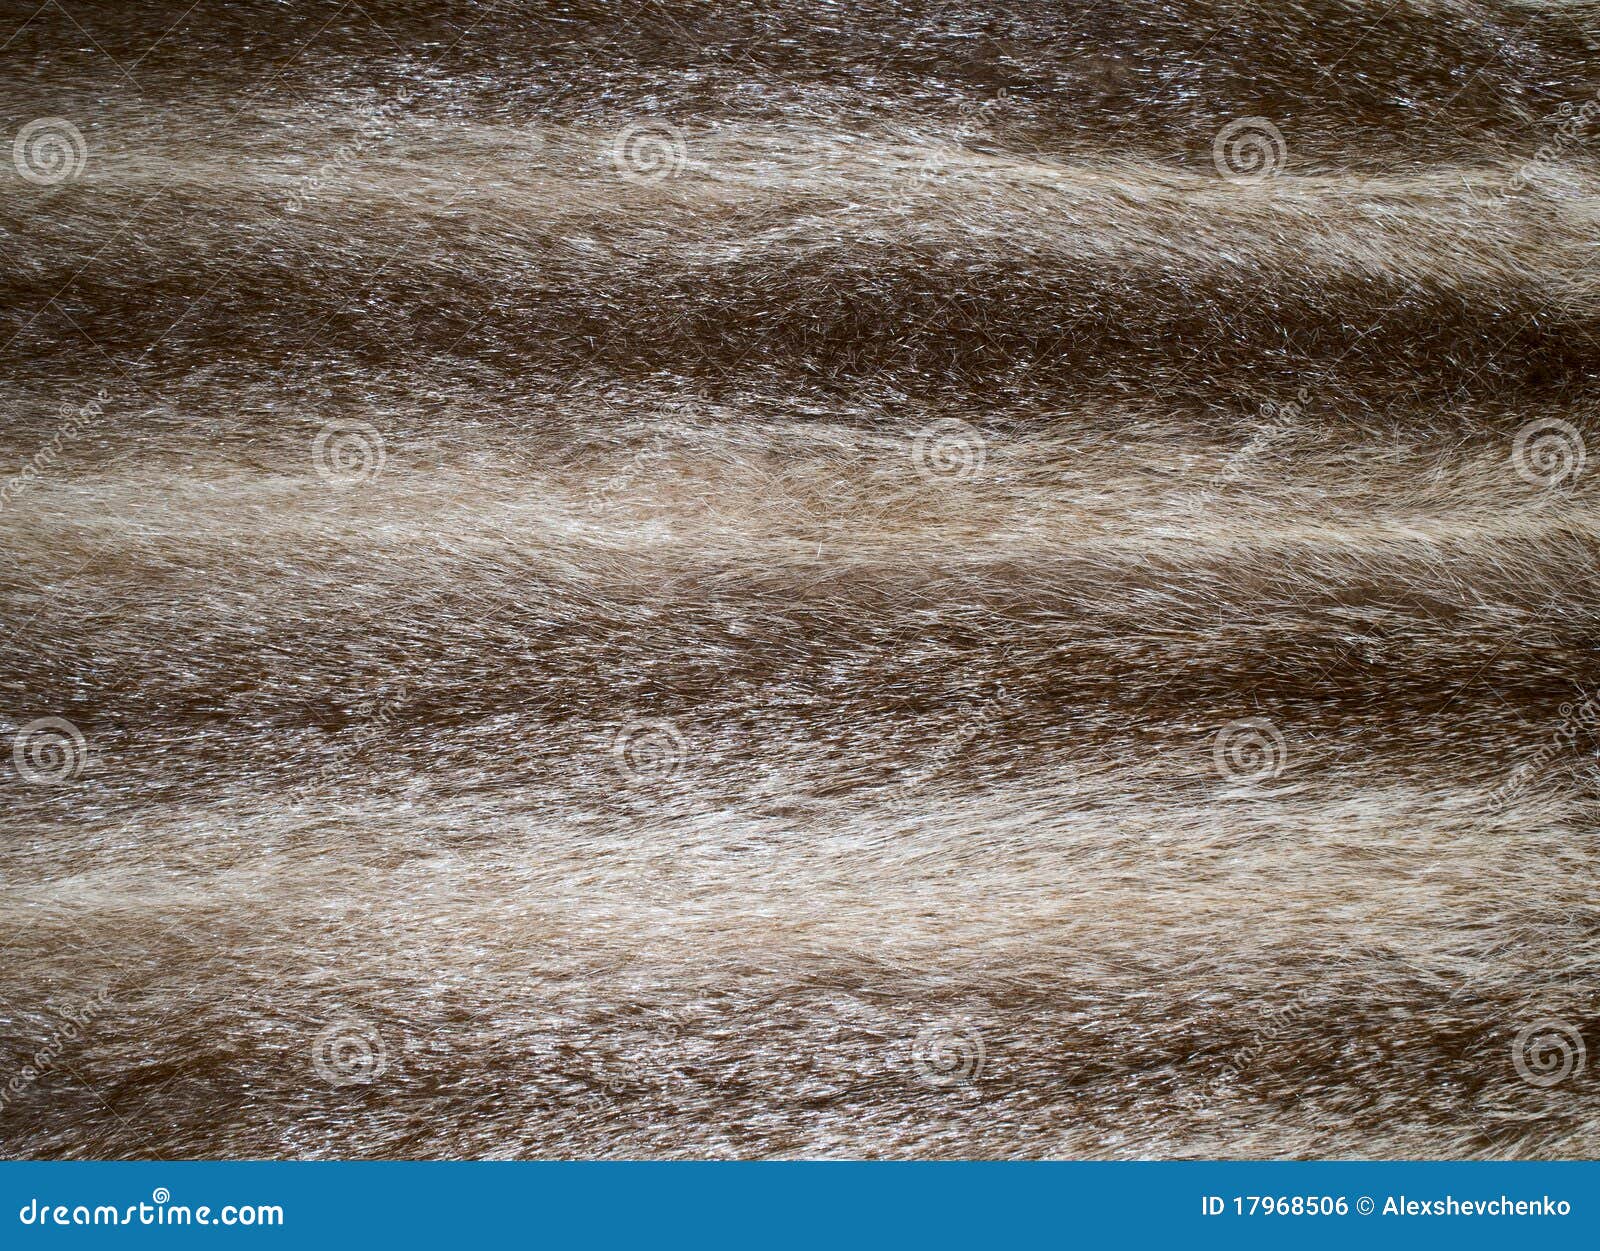 568 Coarse Fur Stock Photos - Free & Royalty-Free Stock Photos from  Dreamstime